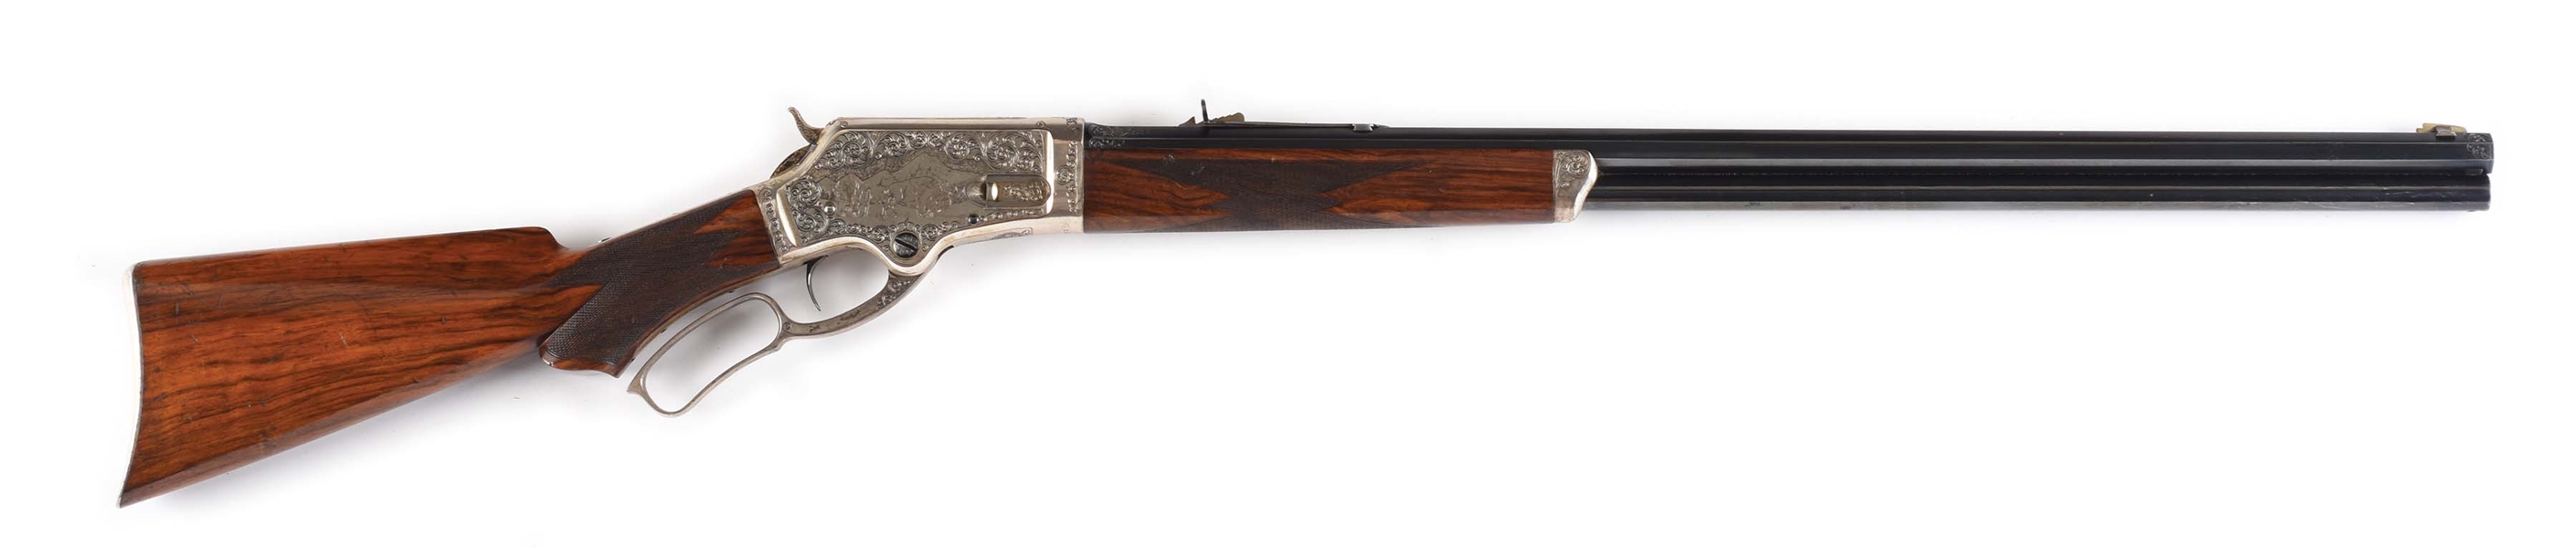 (A) CUSTOM ENGRAVED & RESTORED MARLIN MODEL 1881 LEVER ACTION RIFLE (1887).